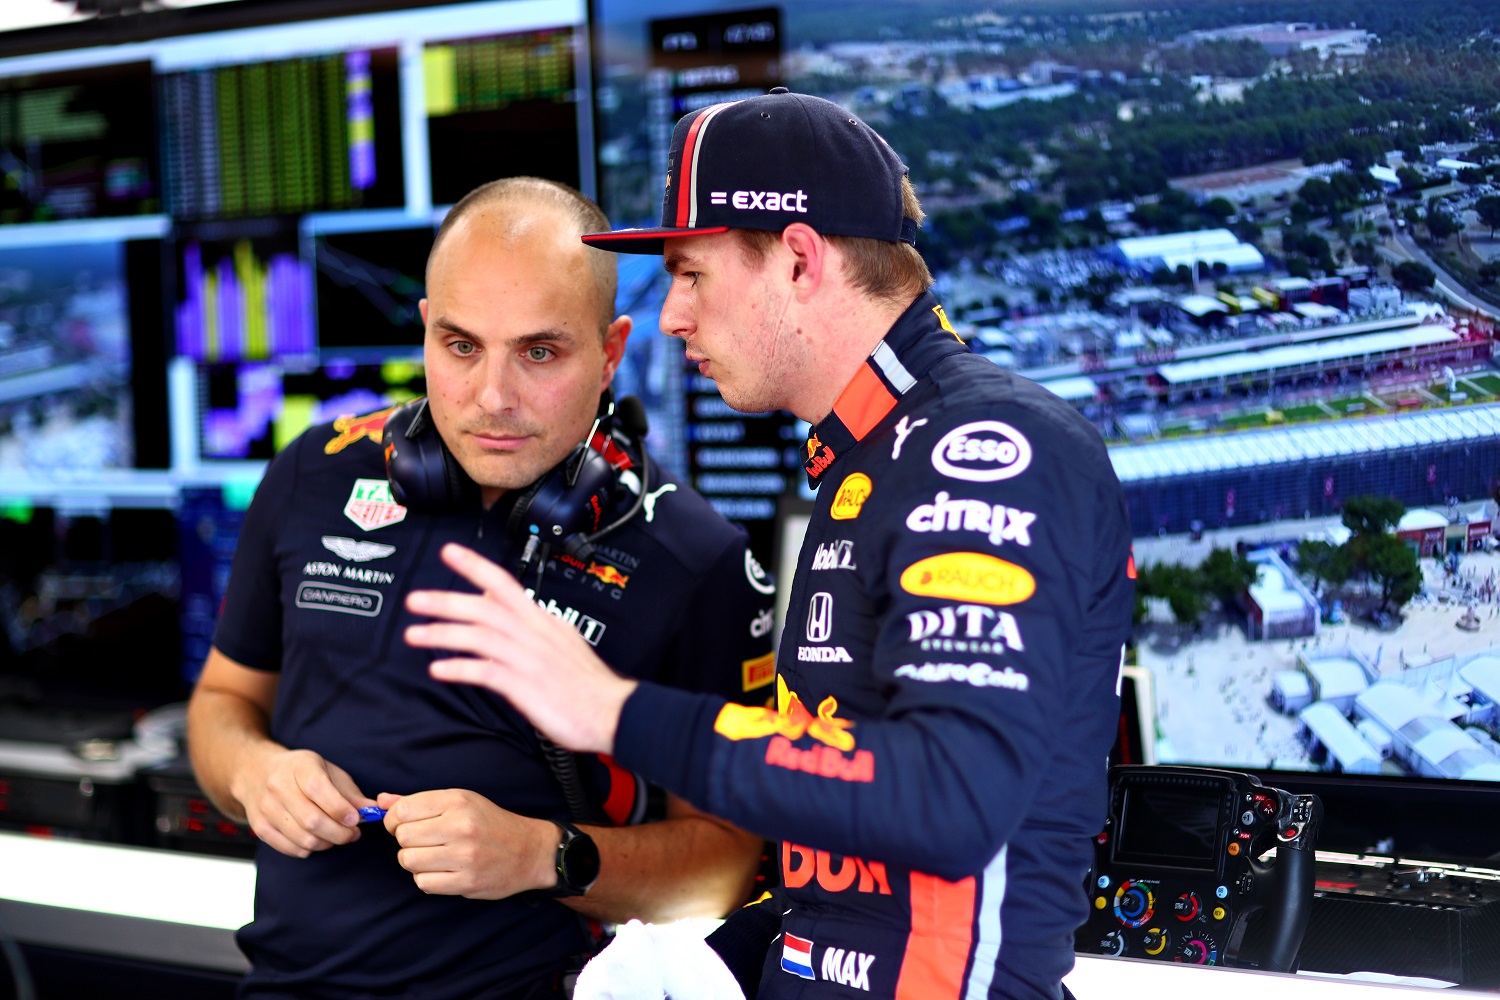 Max Verstappen of Bull Racing talks with race engineer Gianpiero Lambiase in the garage during practice for the Grand Prix of France at Circuit Paul Ricard on June 21, 2019.